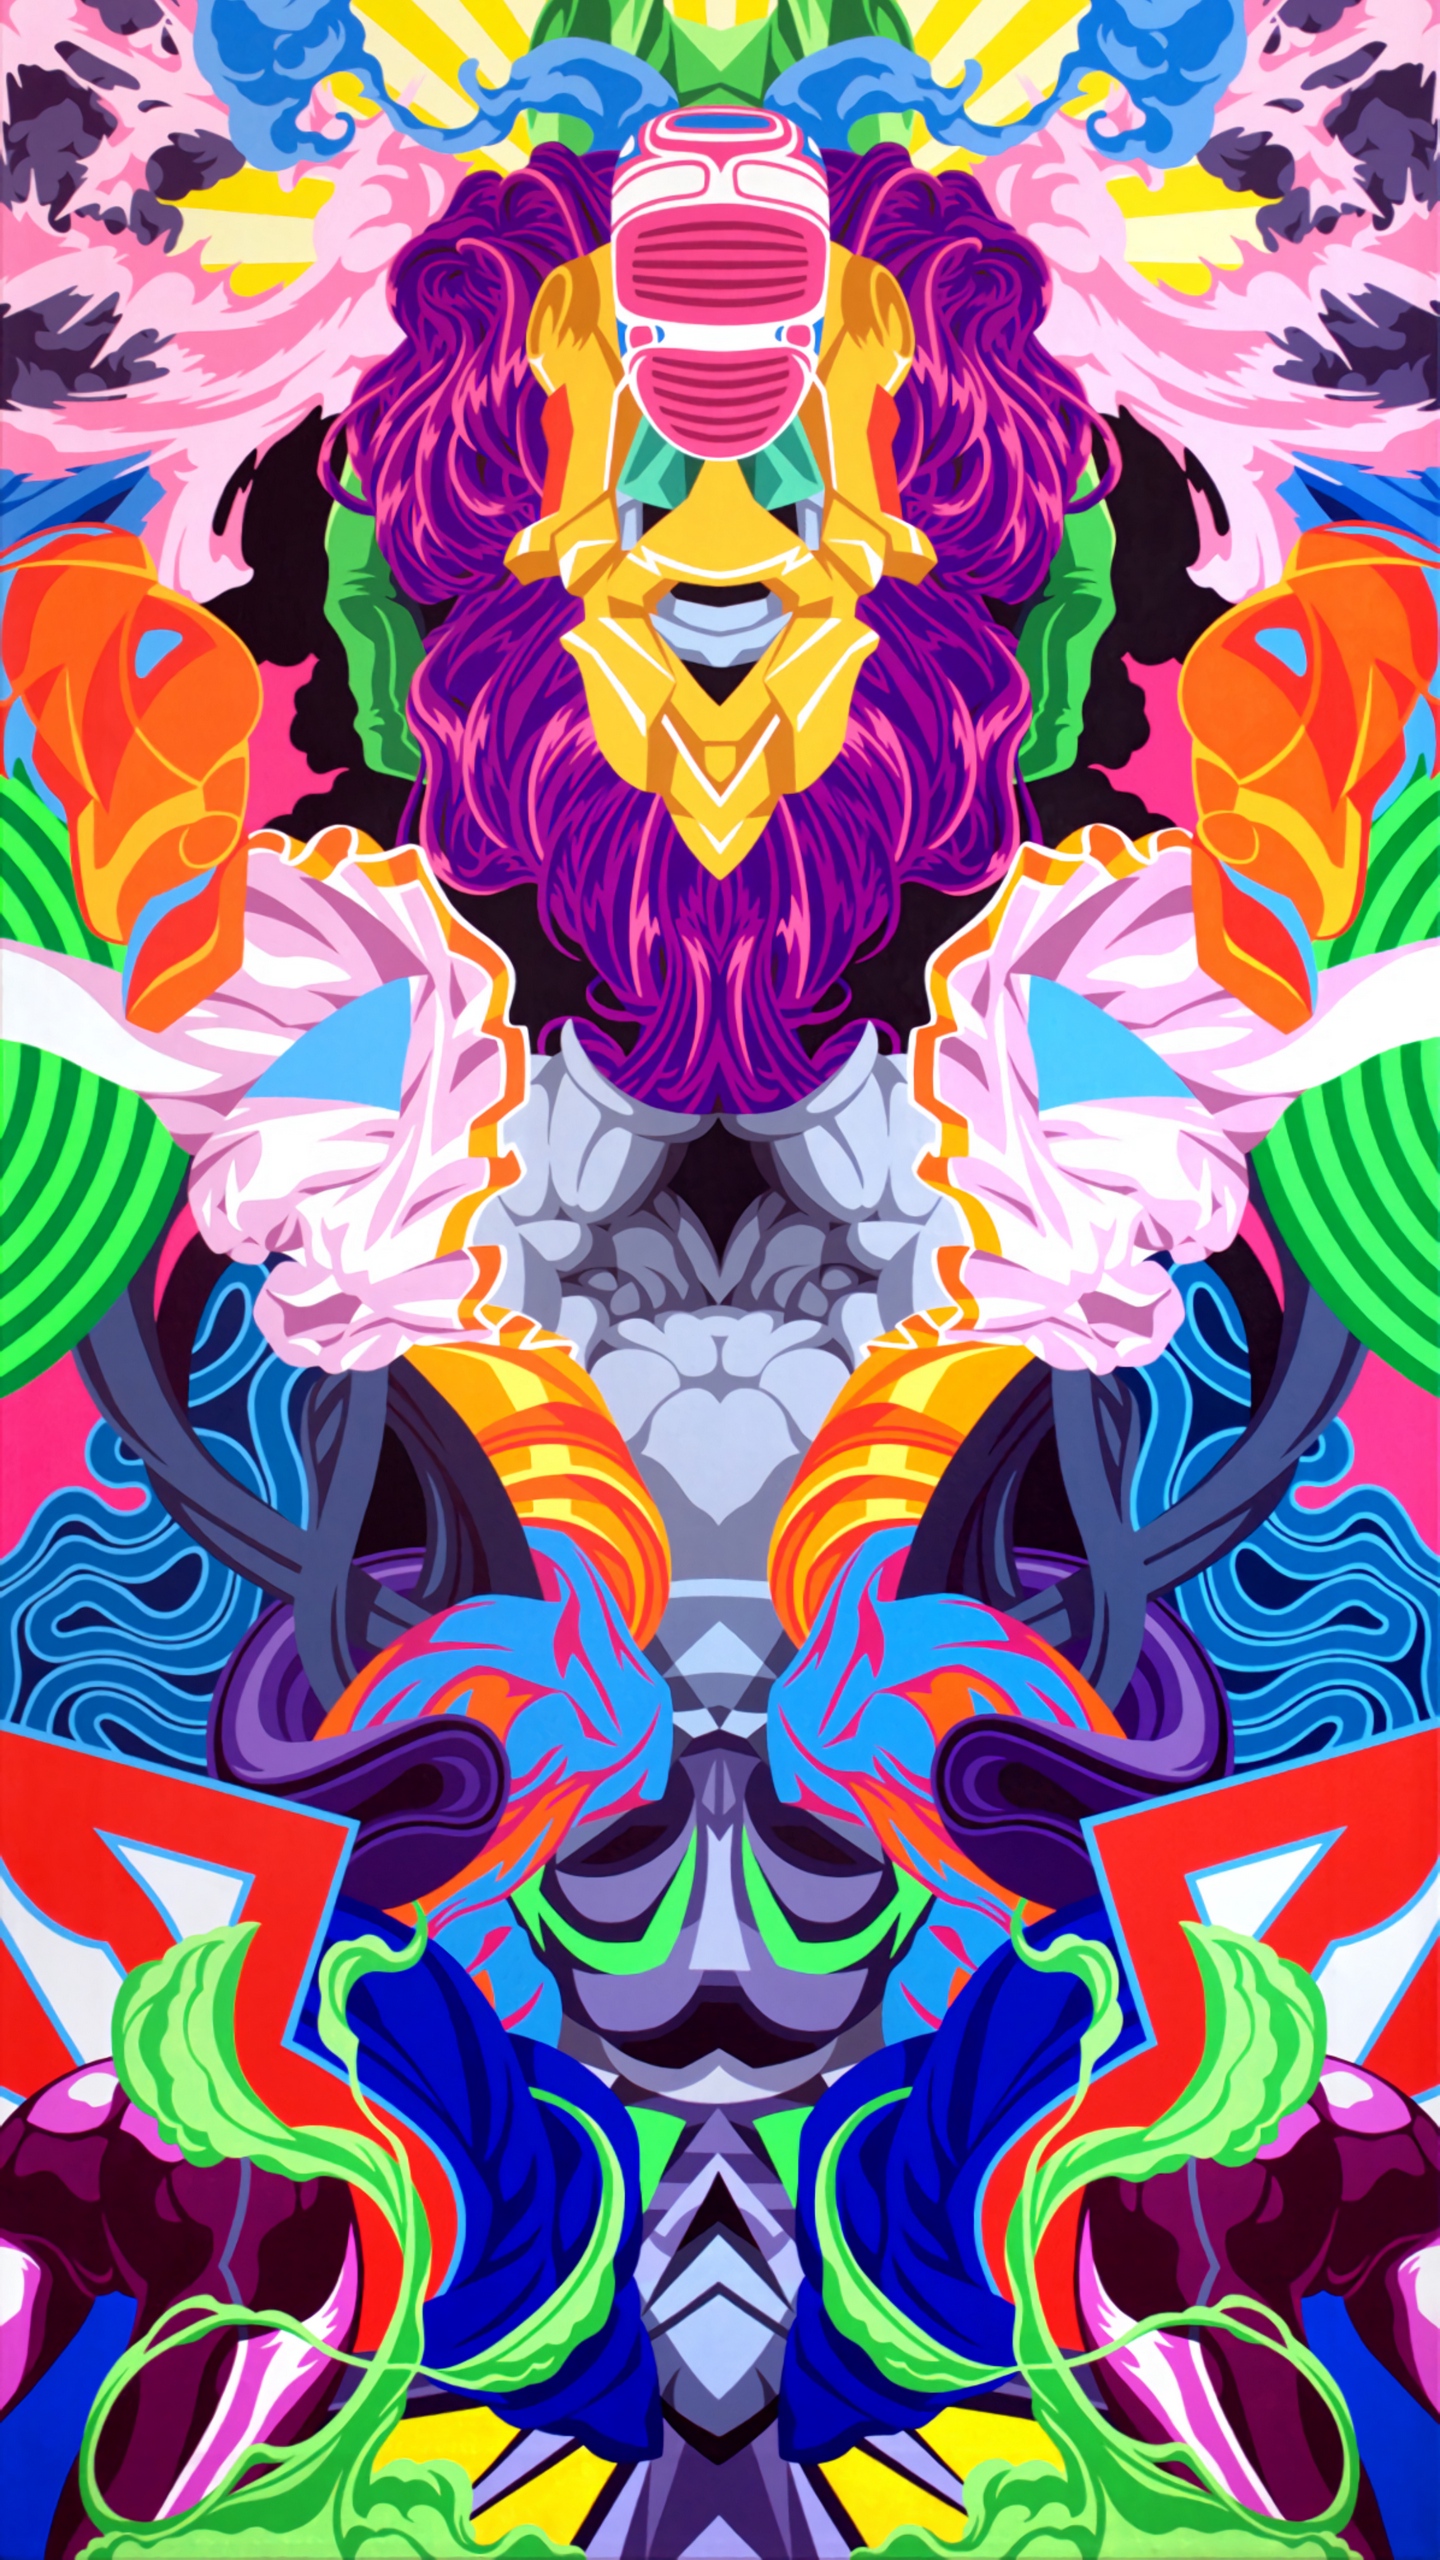 Wallpaper Patterns, Colorful, Abstract, Art - Psychedelic Wallpaper Iphone X - HD Wallpaper 